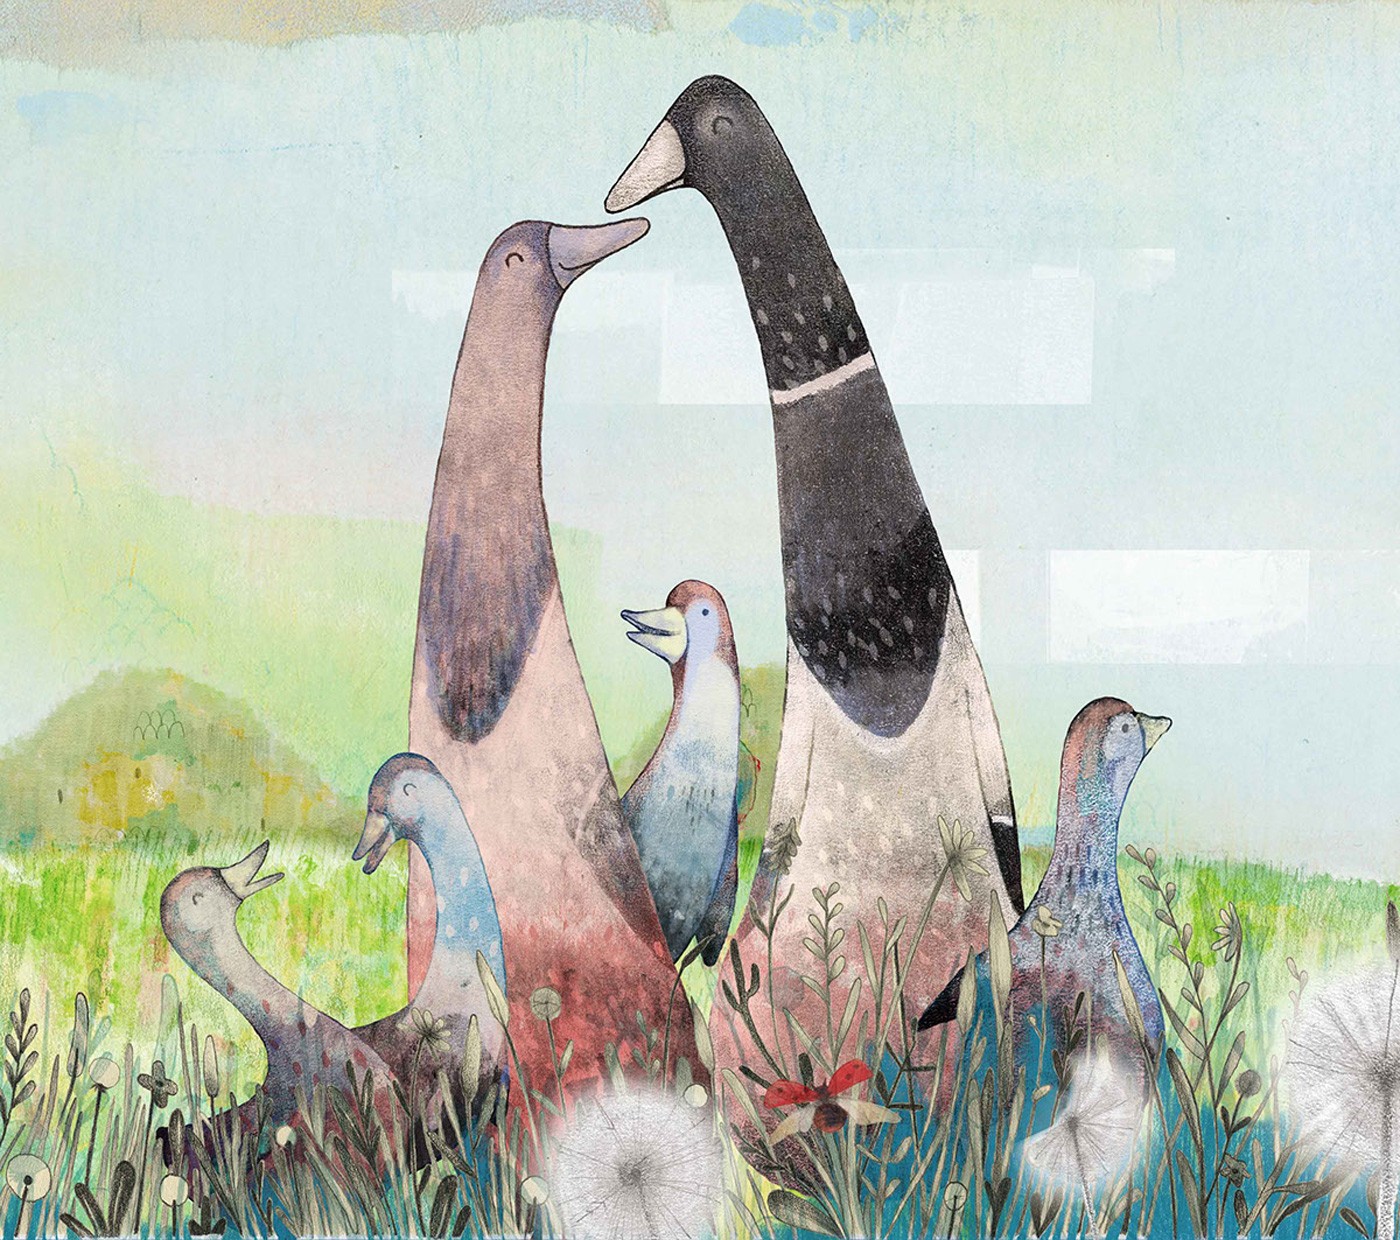 Surreal illustration of geese